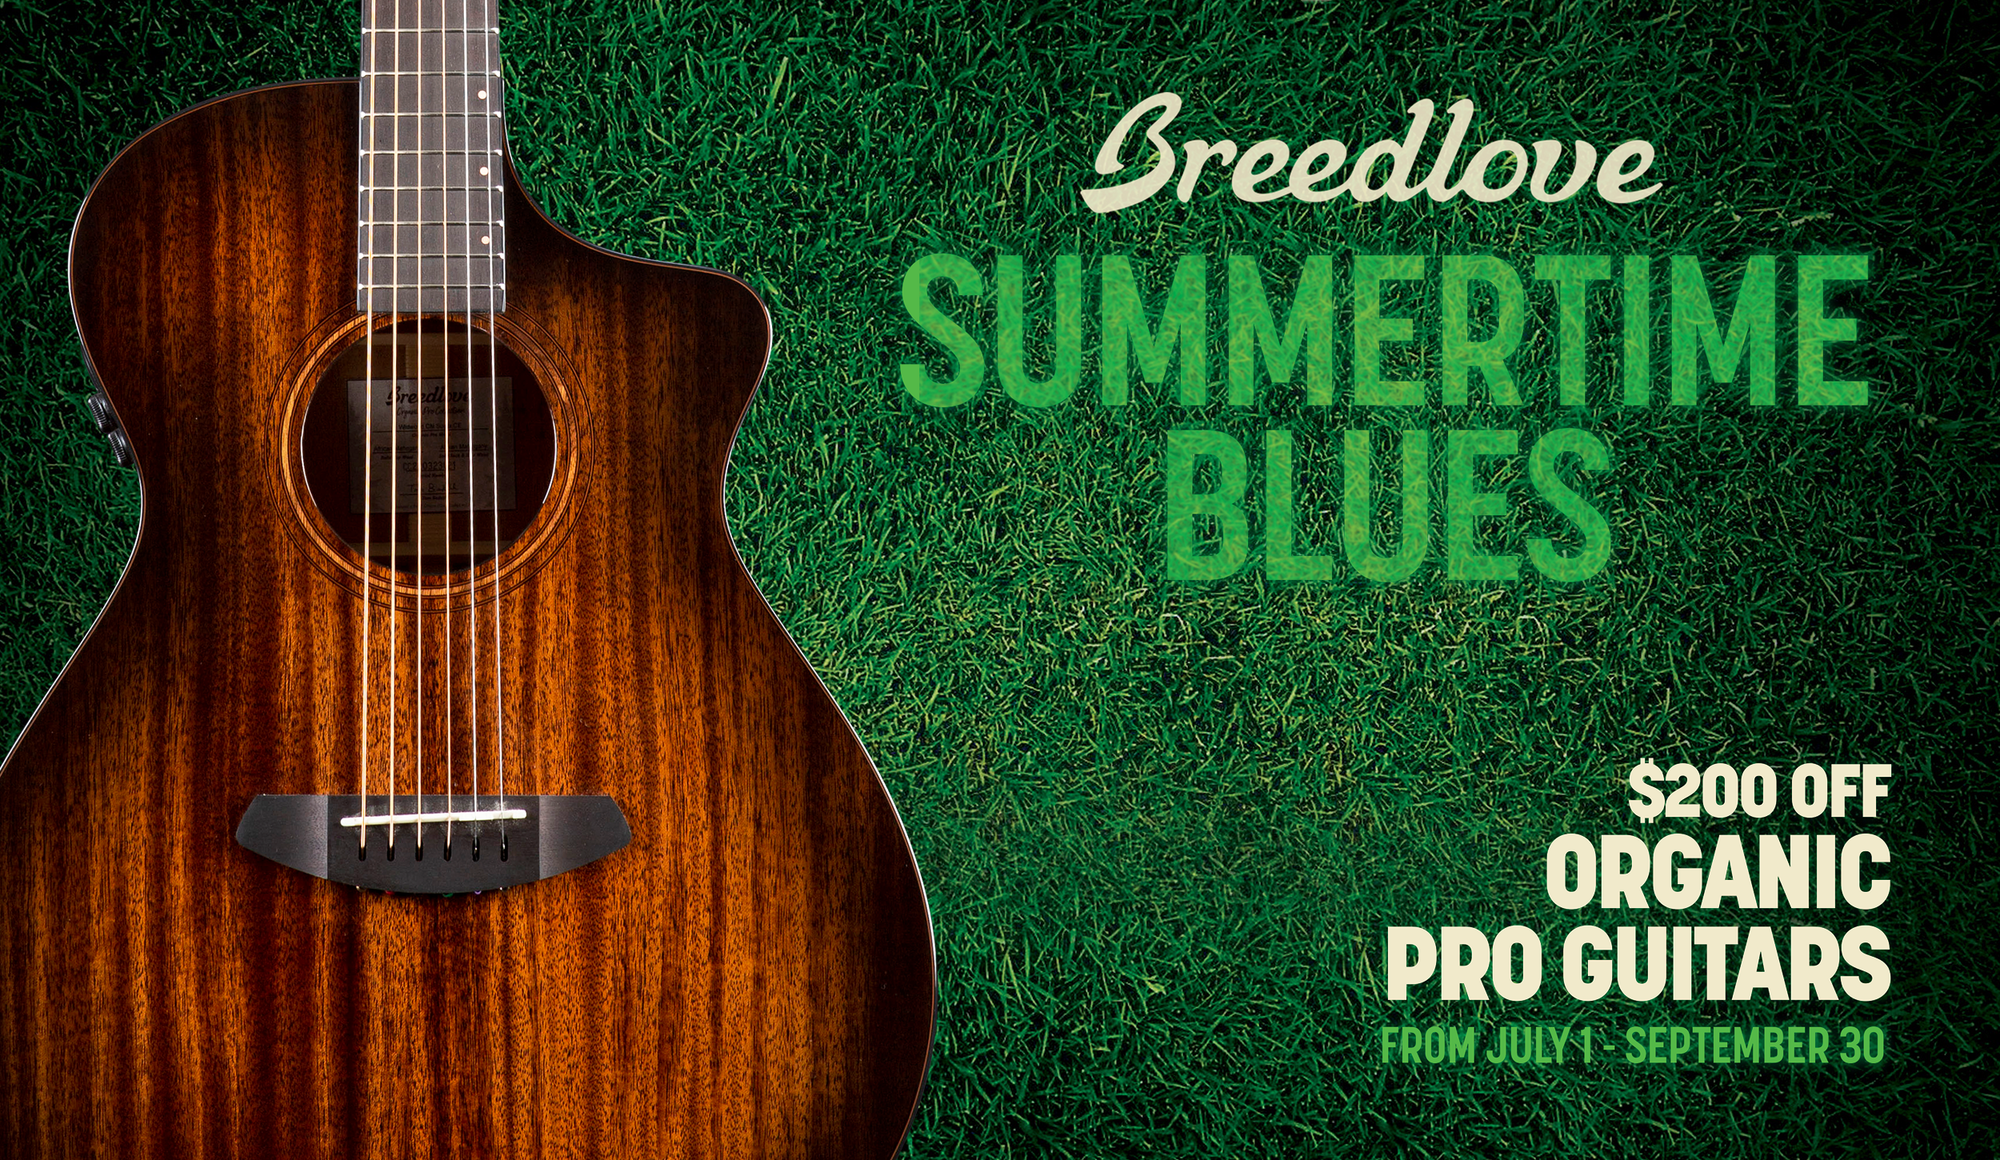 Breedlove Organic Pro Sale - Enter code BL200 during checkout and save $200!